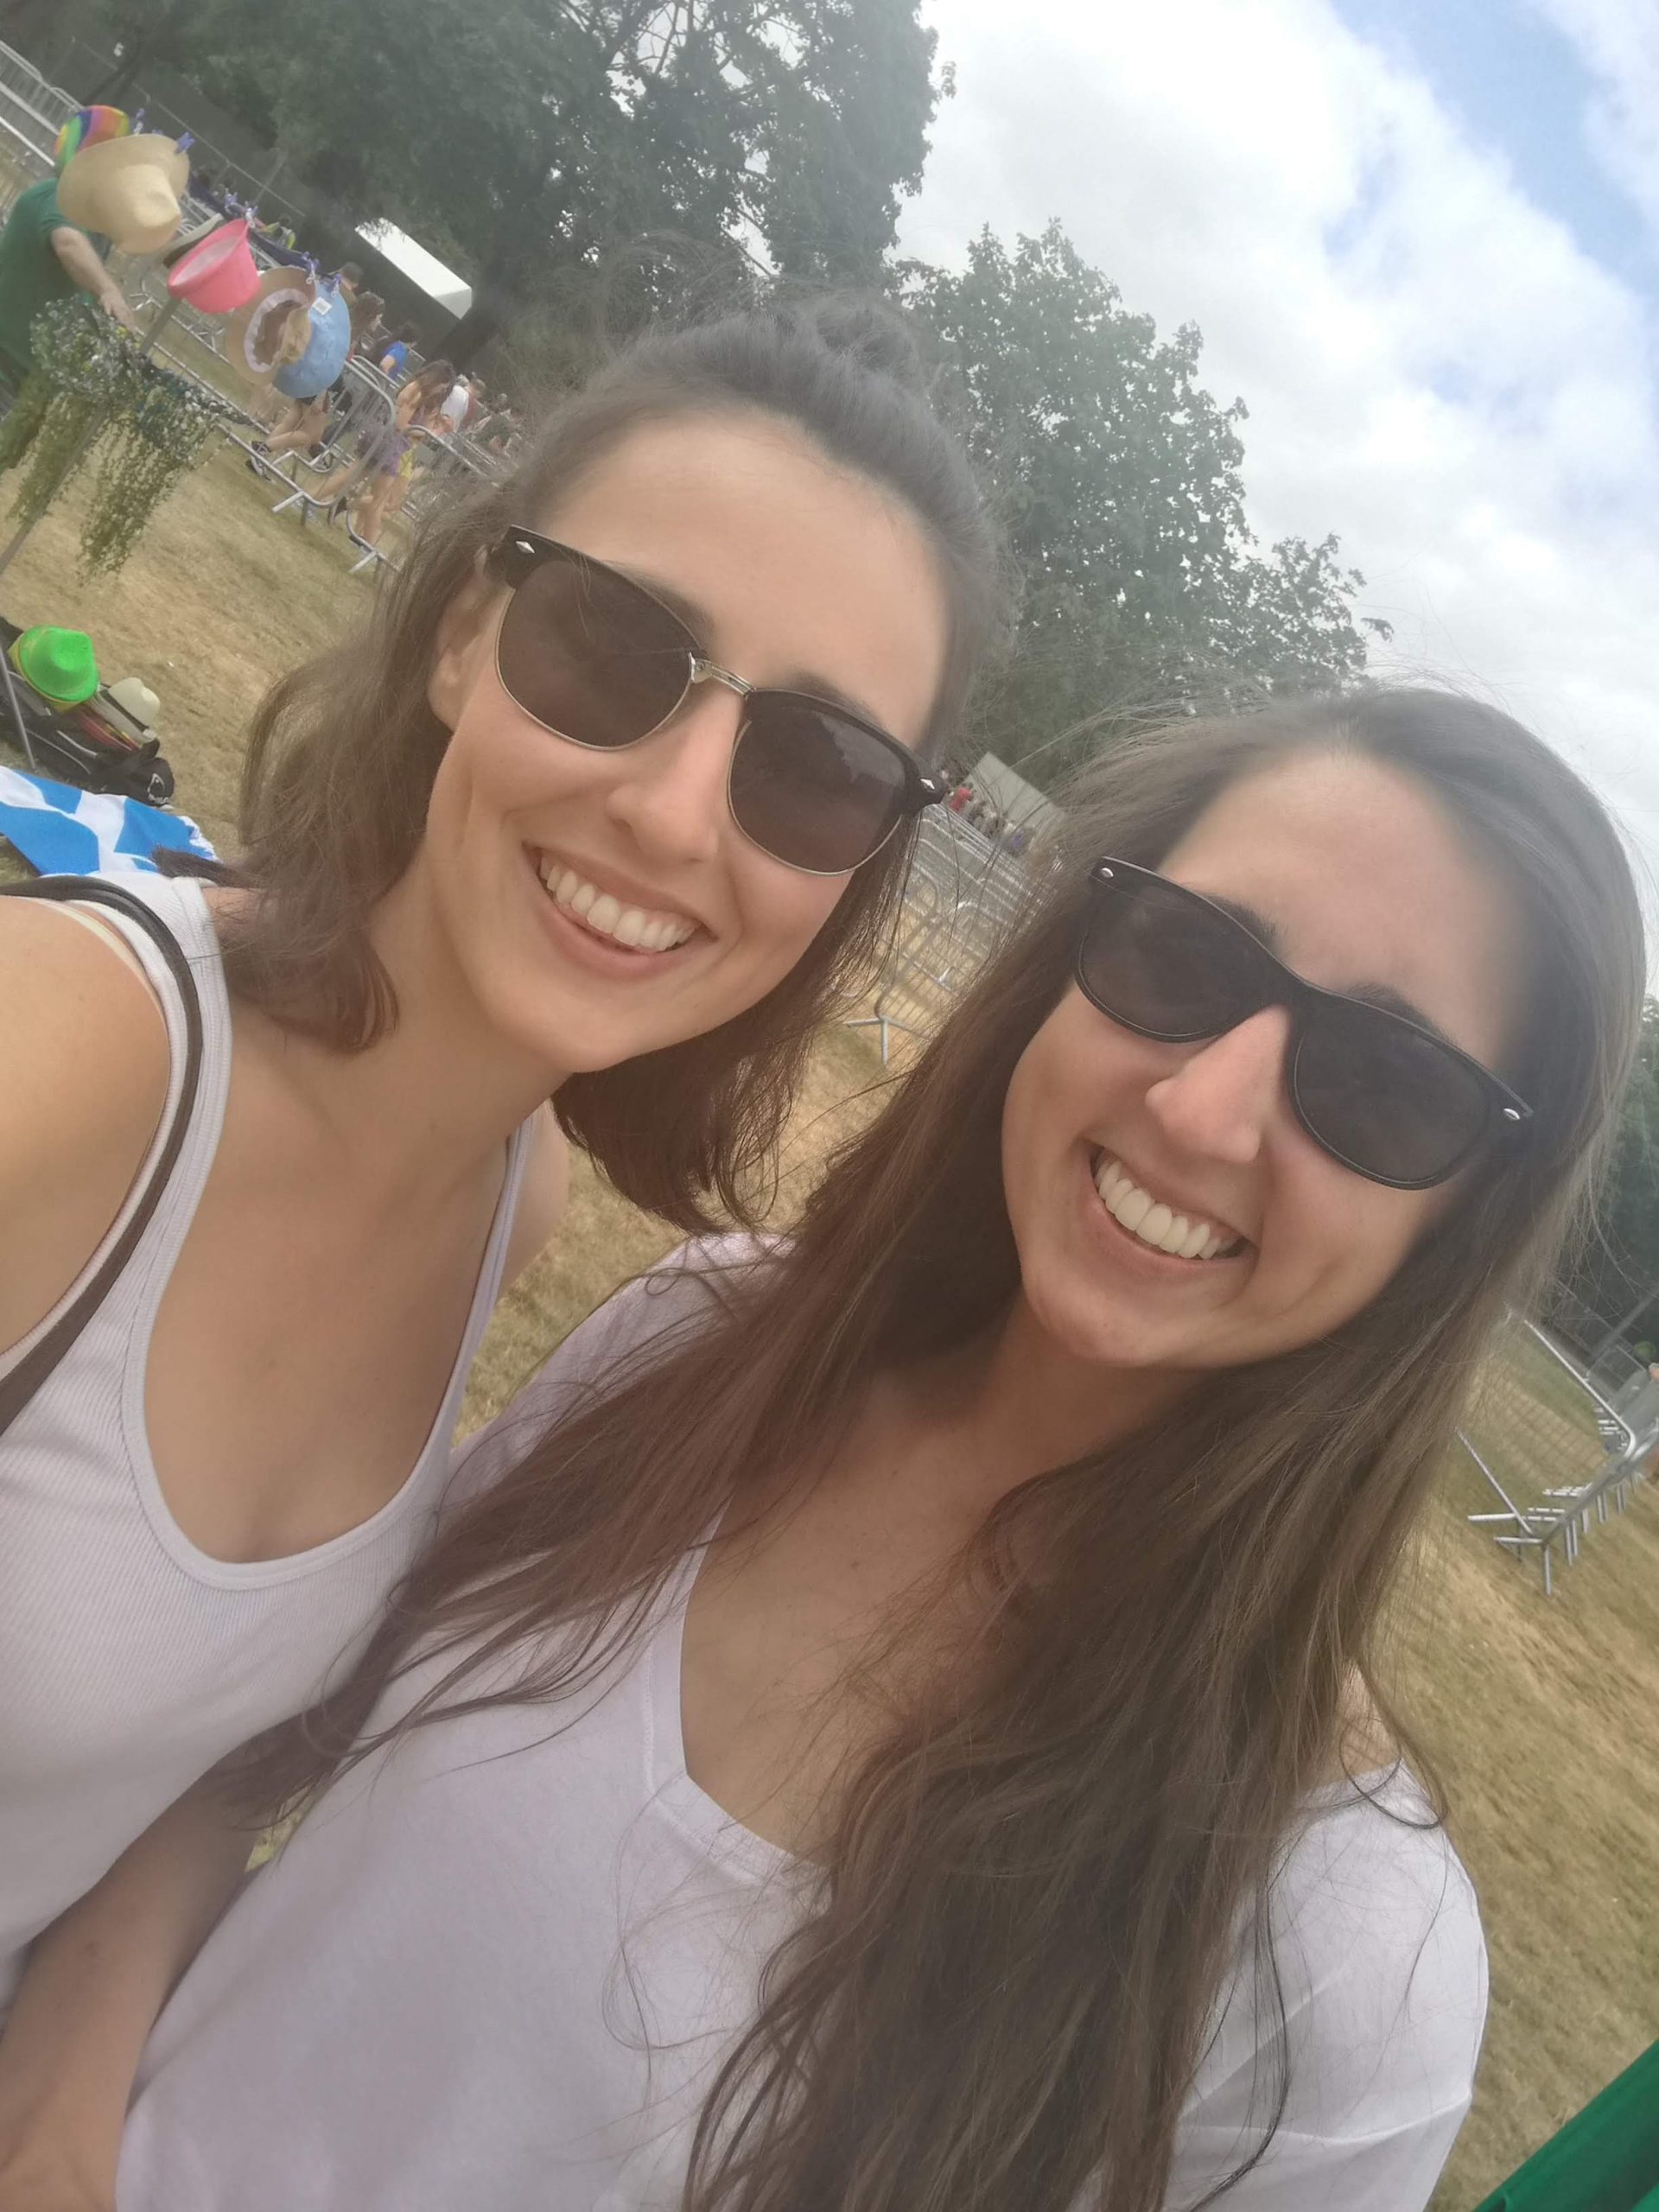 Image shows Harriet on the left with her sister to the right wearing sunglasses on a sunny day outside